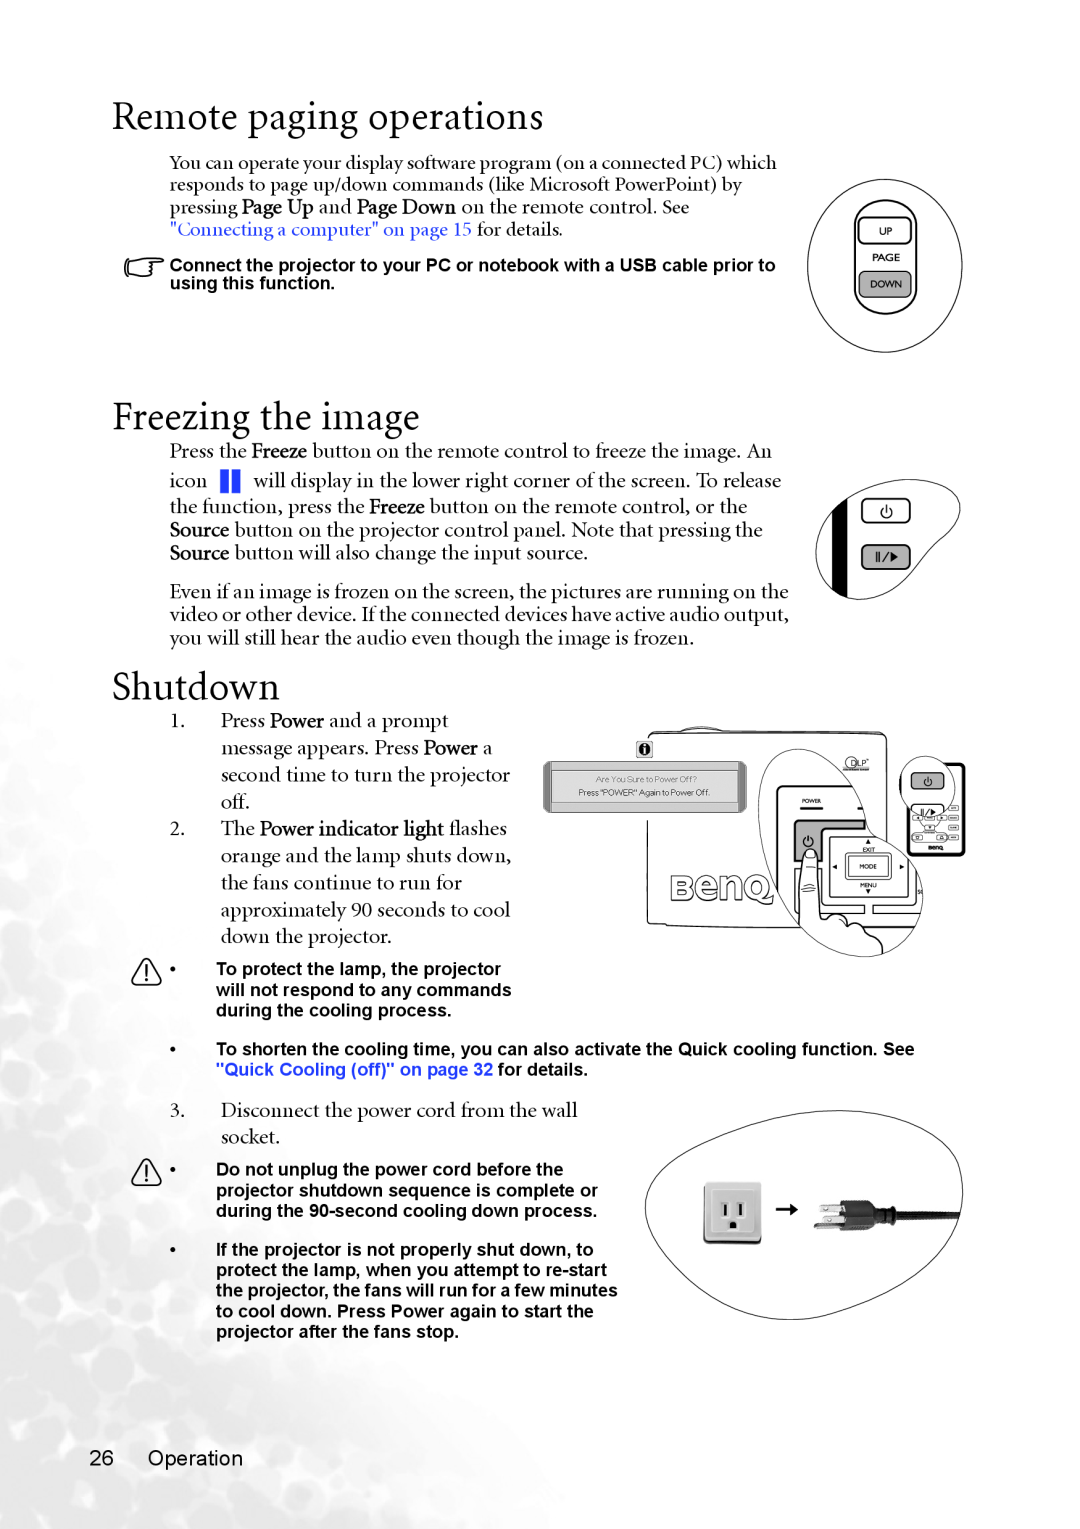 BenQ MP620p user manual Remote paging operations, Freezing the image, Shutdown, The Power indicator light flashes 